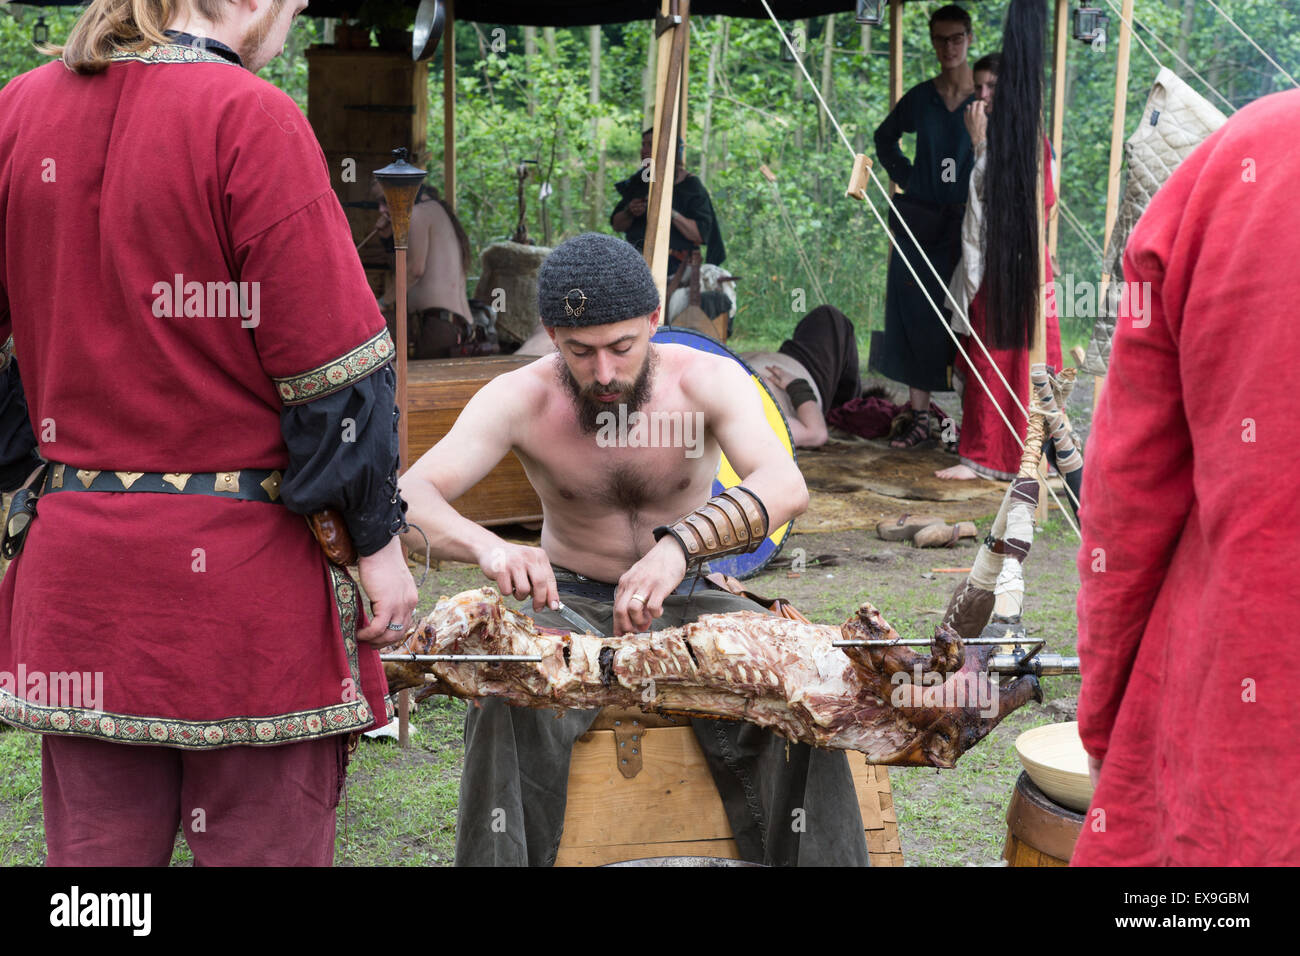 A man at a medieval festival carves a pig roast on a spit Stock Photo